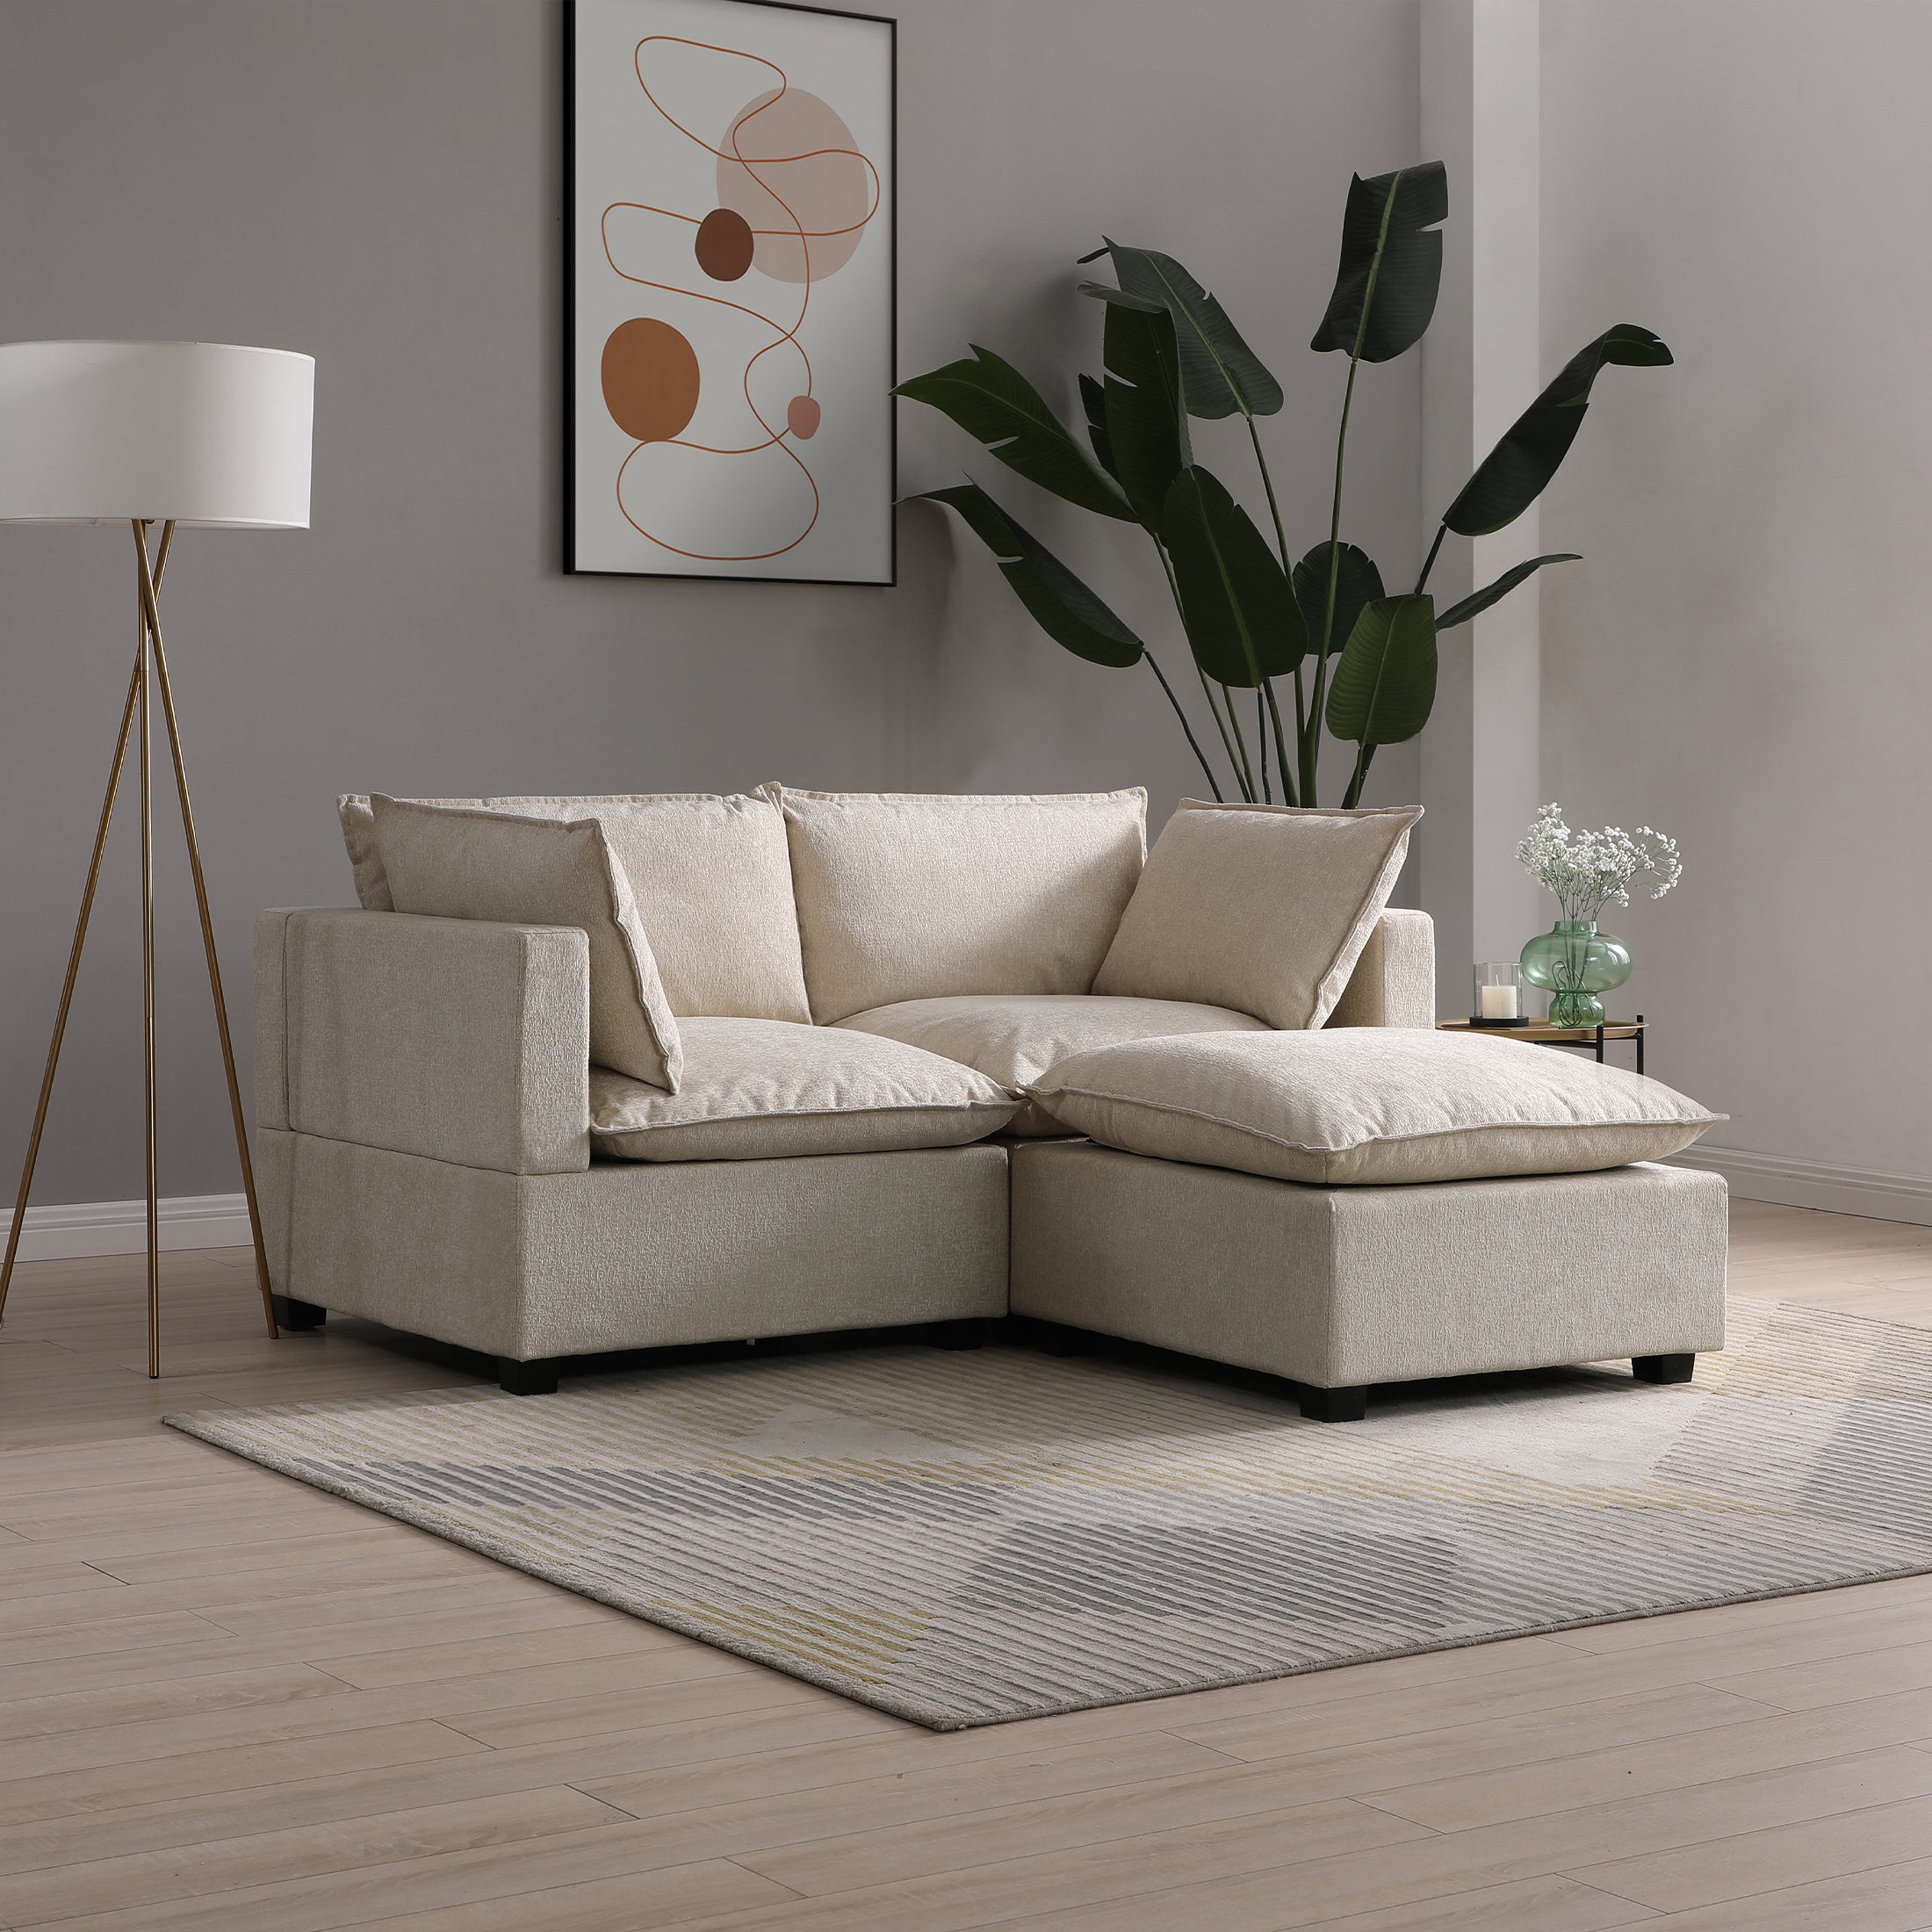 Moda 2 Seater Modular Sofa with Chaise, Natural Boucle | Dunelm